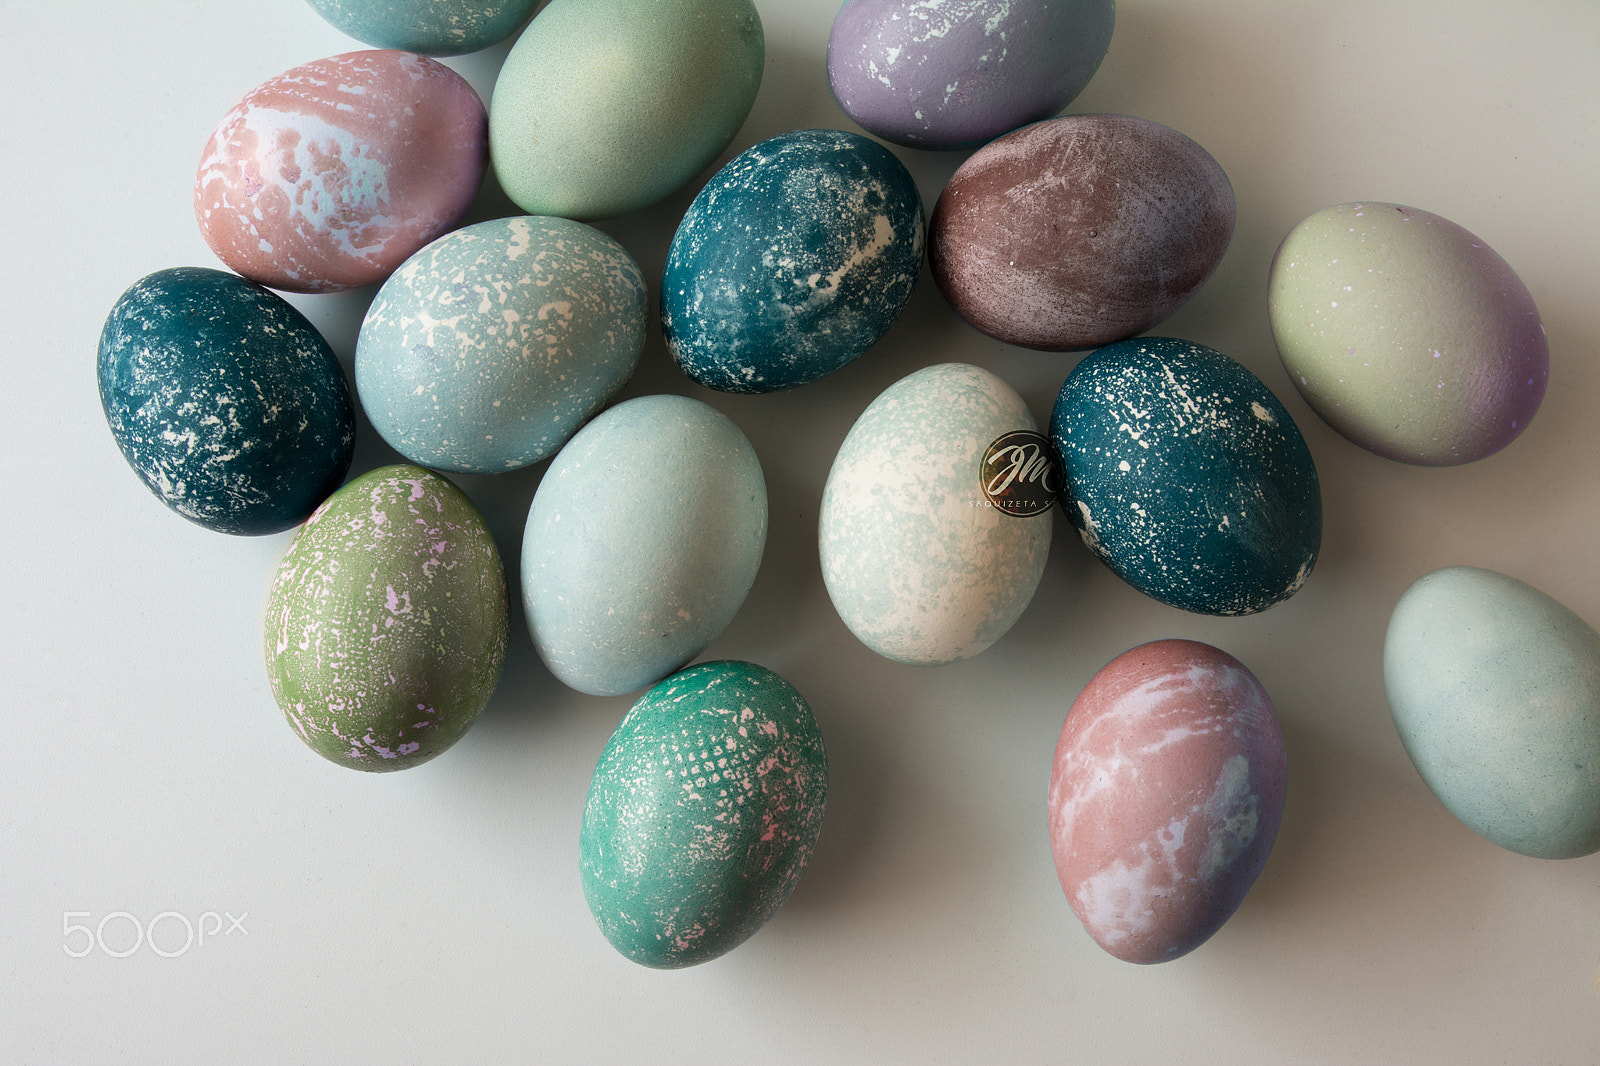 Nikon D7100 + Tamron SP AF 17-50mm F2.8 XR Di II VC LD Aspherical (IF) sample photo. Easter eggs painted in pastel colors scattered photography